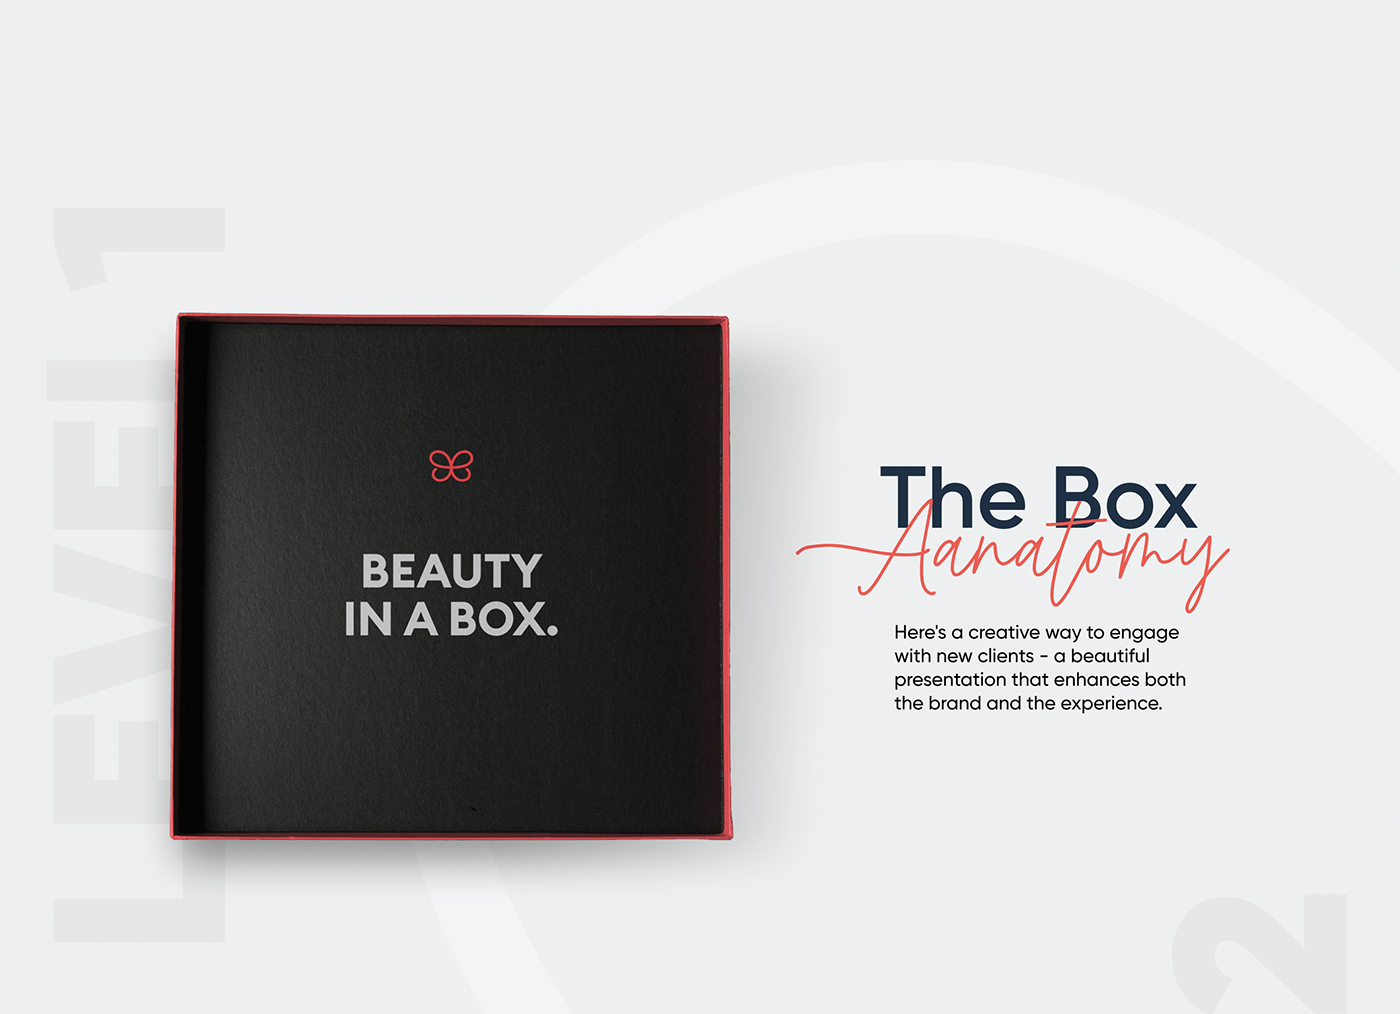 Evolus gift box user manual branded with symbol, with concept’s explanatory text using typefaces.